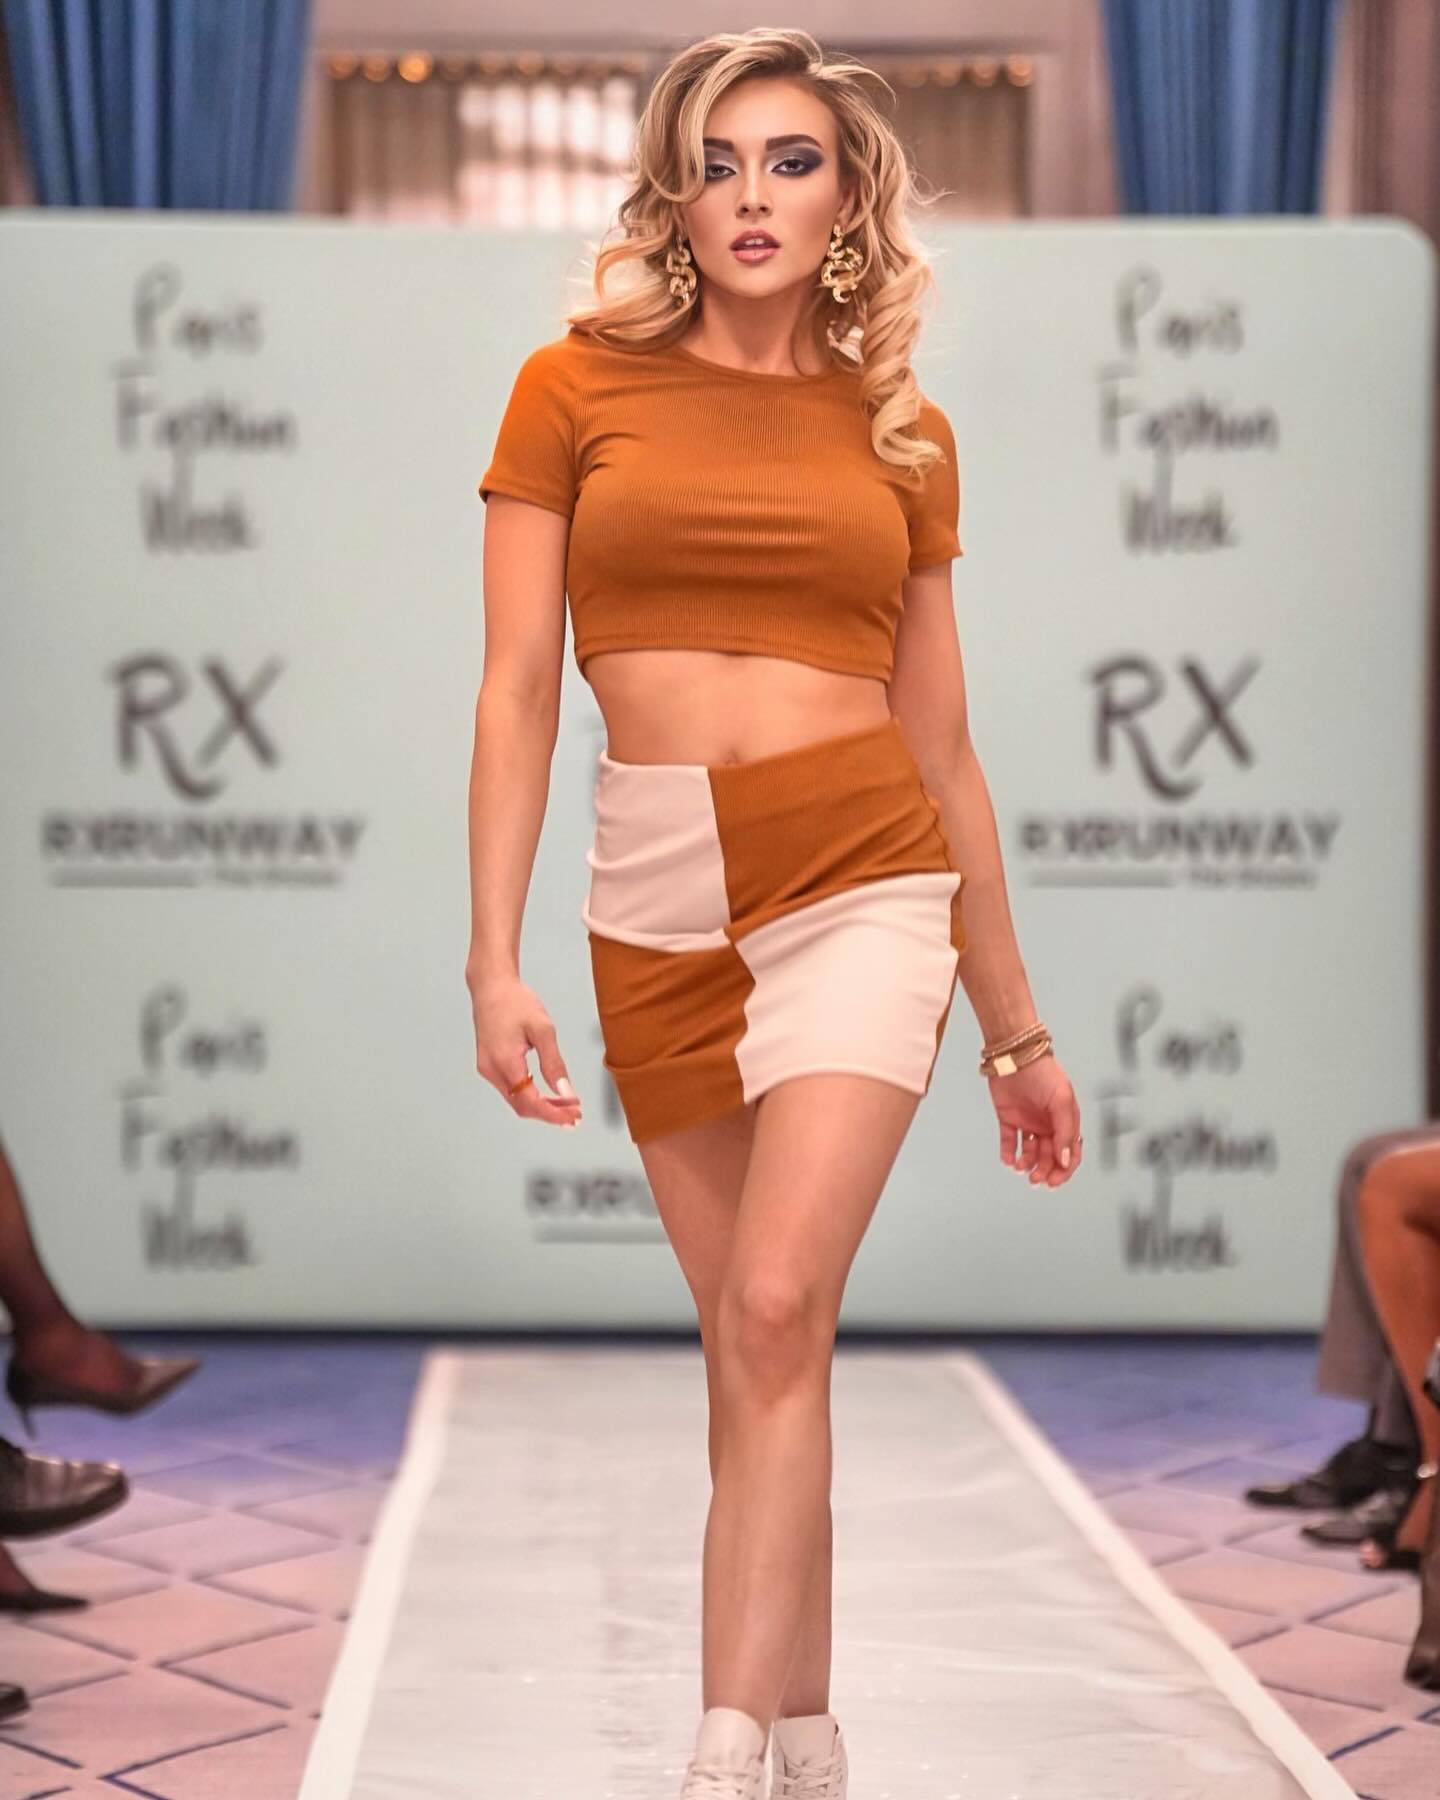 Life is a fashion show♥ 
This time it was Paris for my runway✰